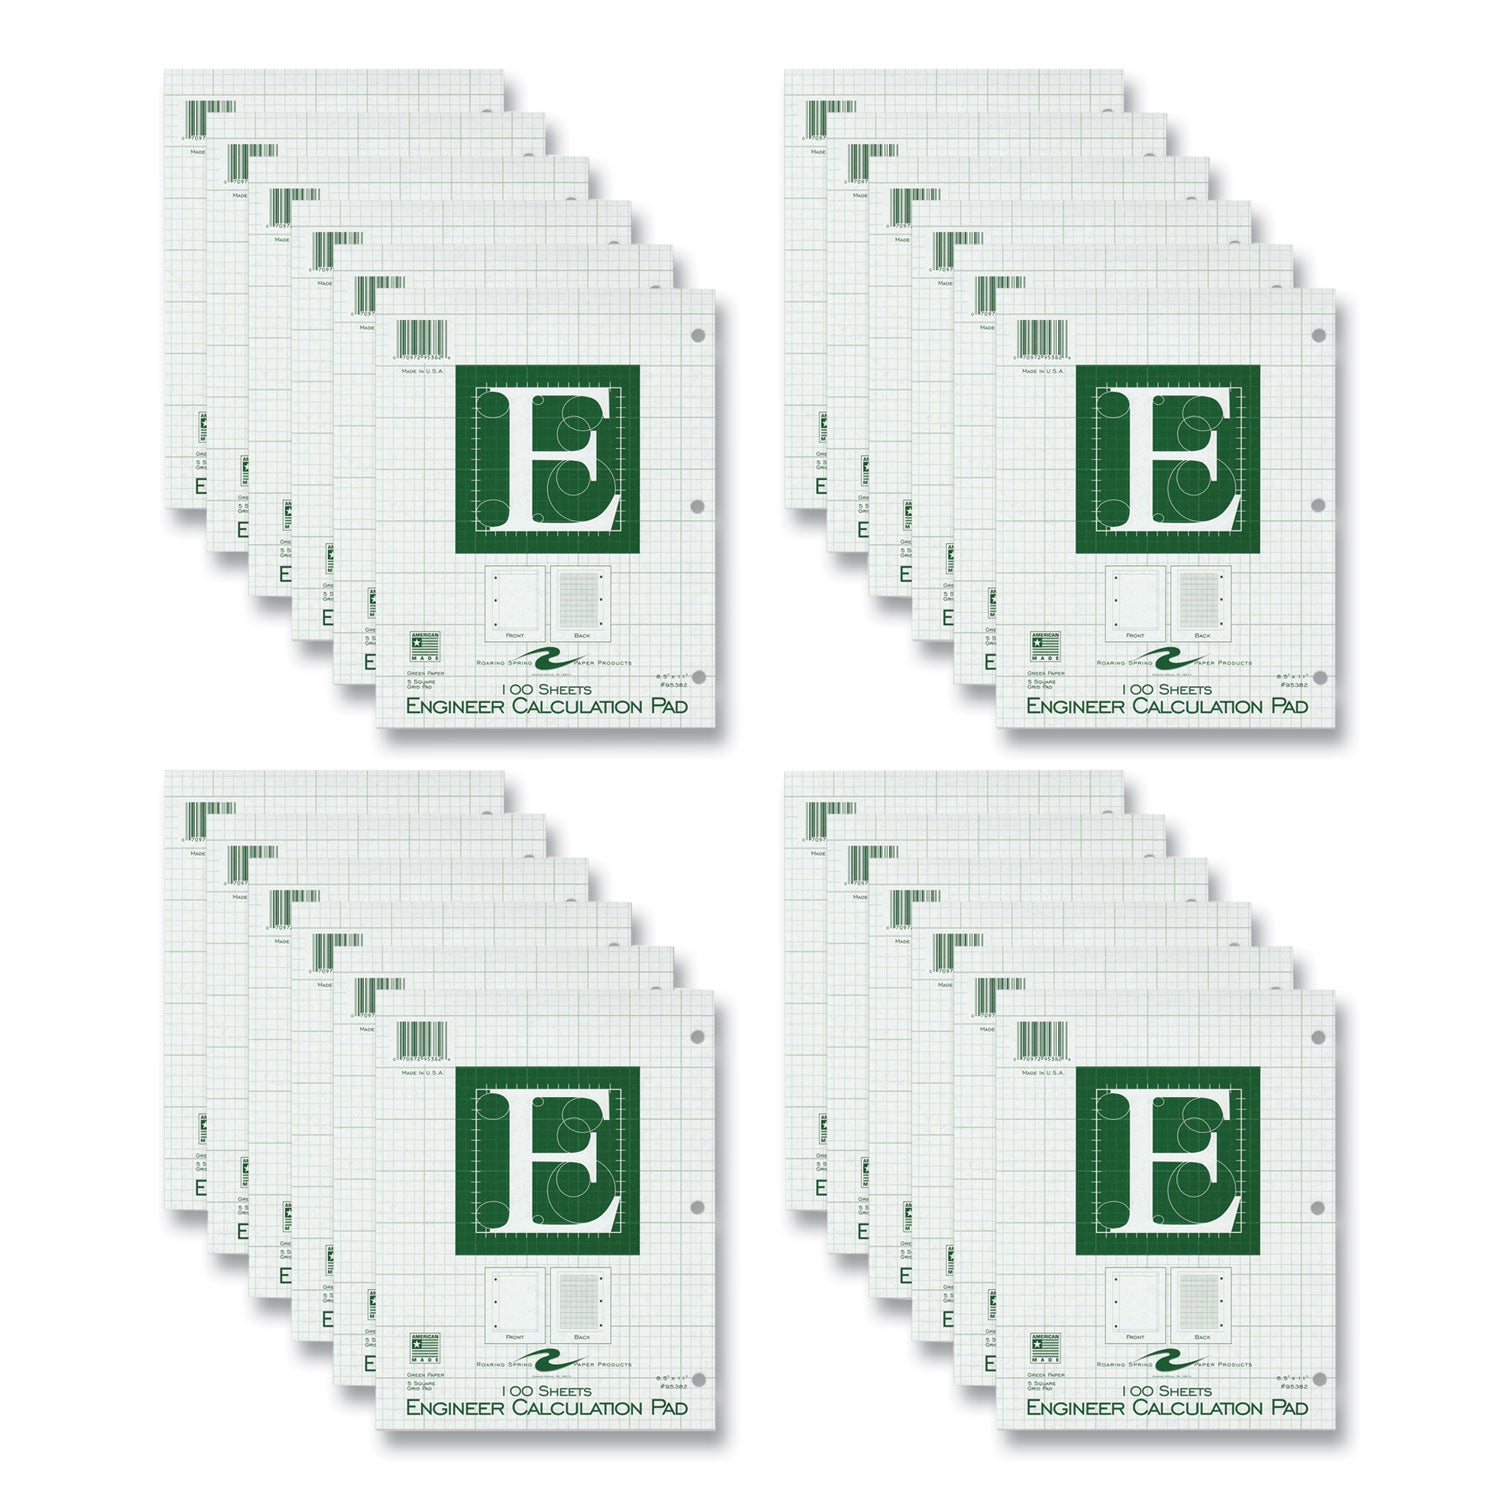 engineer-pad-05-margins-quad-rule-5-sq-in-1-sq-in-100-lt-green-85x11-sheets-pad-24-ct-ships-in-4-6-business-days_roa95382cs - 2